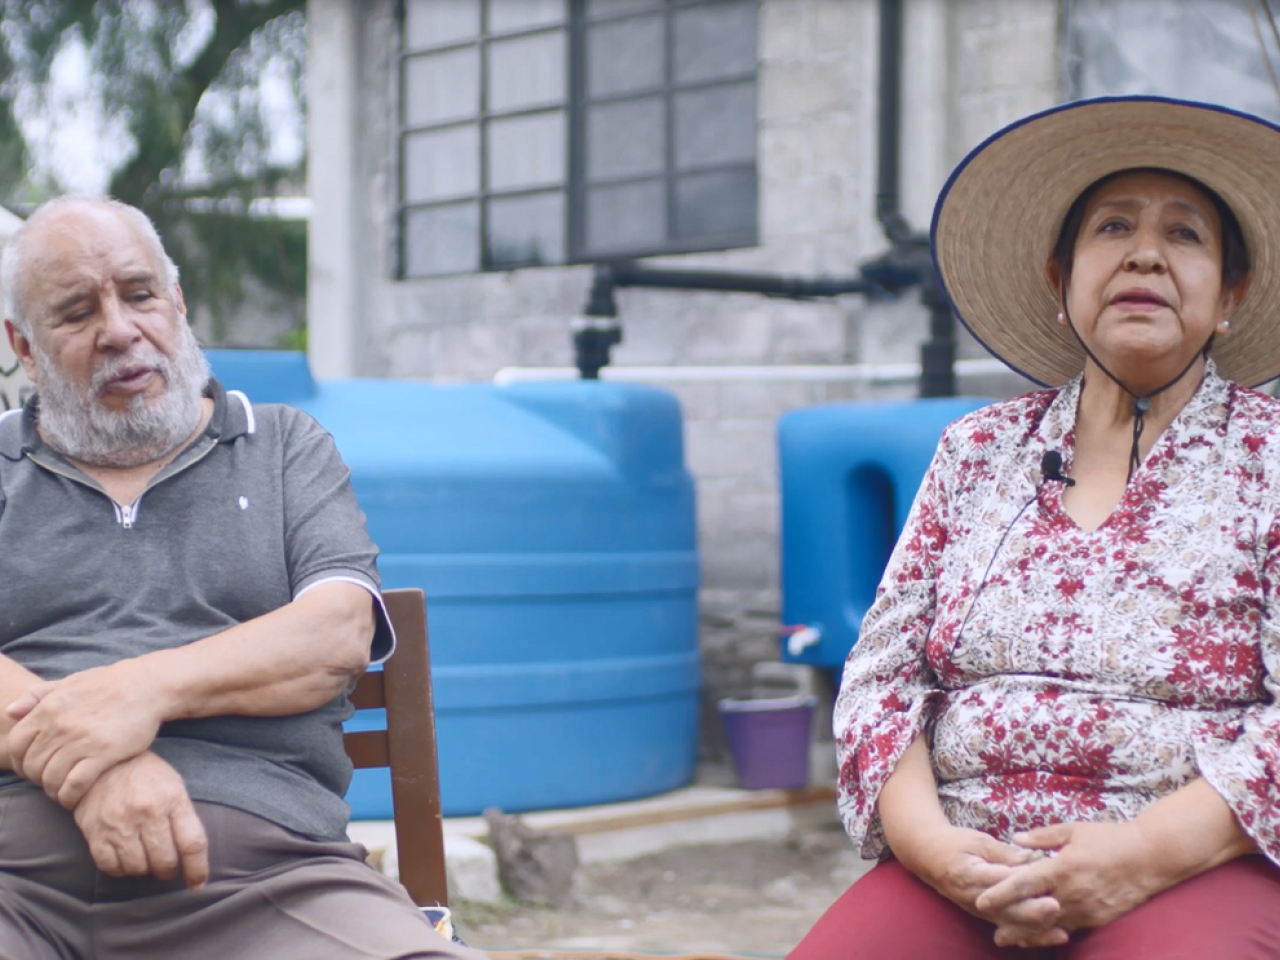 Gloria and Sergio sitting in chairs outside, in front of large water collection containers.